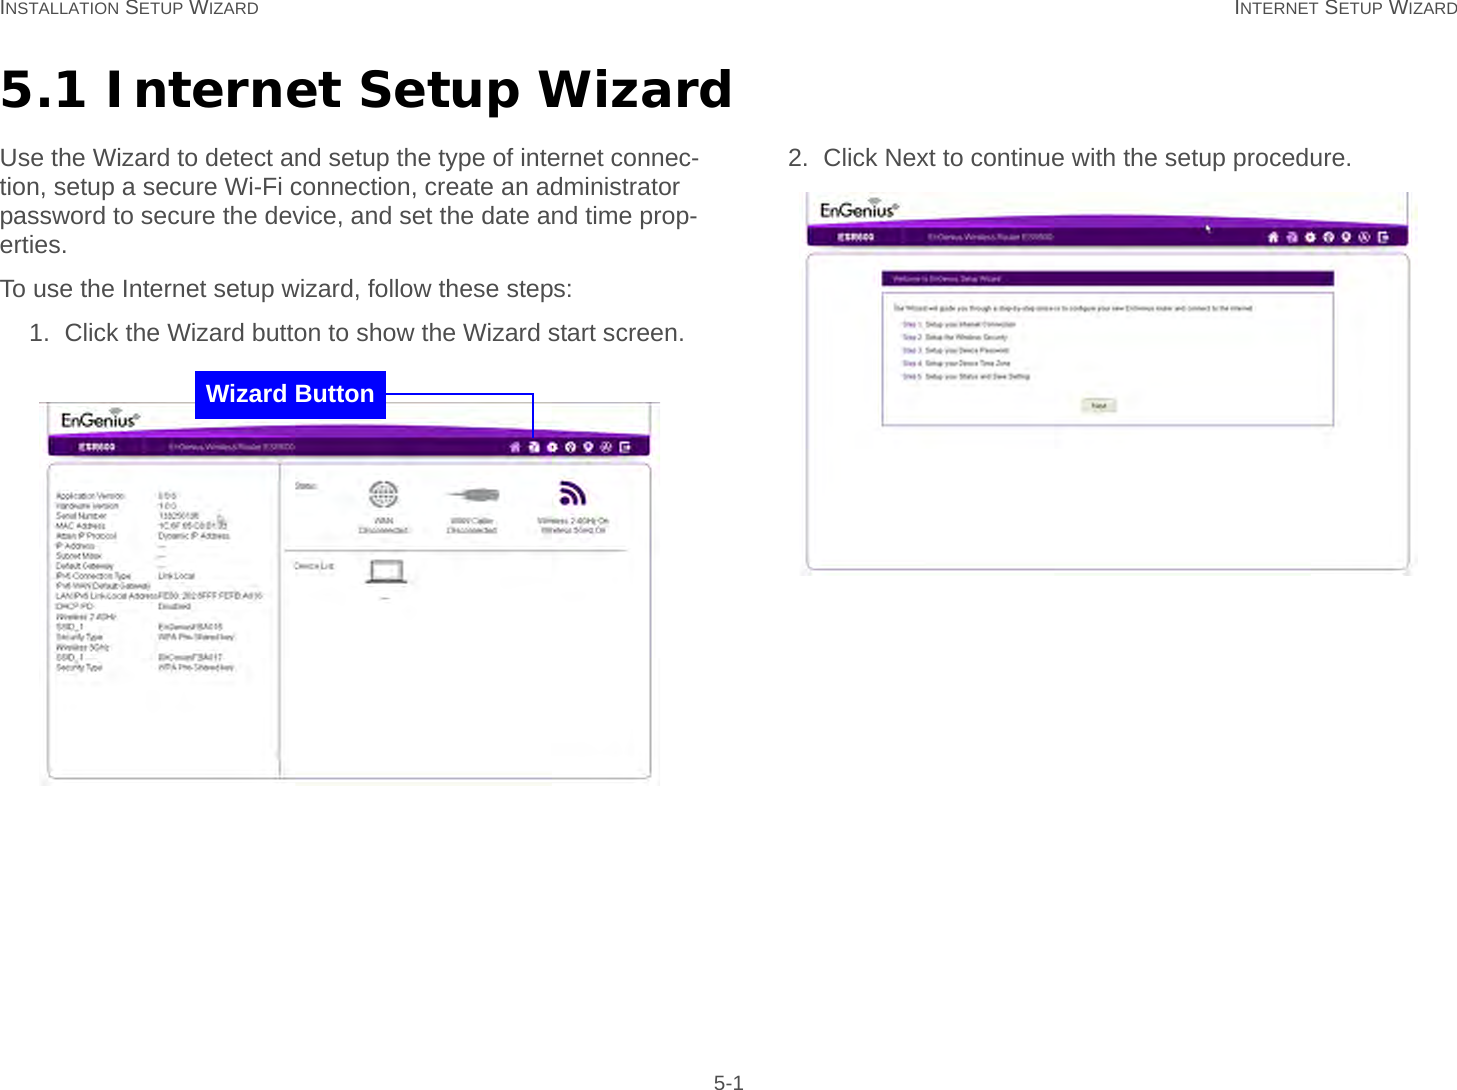 INSTALLATION SETUP WIZARD INTERNET SETUP WIZARD 5-15.1 Internet Setup WizardUse the Wizard to detect and setup the type of internet connec-tion, setup a secure Wi-Fi connection, create an administrator password to secure the device, and set the date and time prop-erties.To use the Internet setup wizard, follow these steps:1. Click the Wizard button to show the Wizard start screen.2. Click Next to continue with the setup procedure.Wizard Button